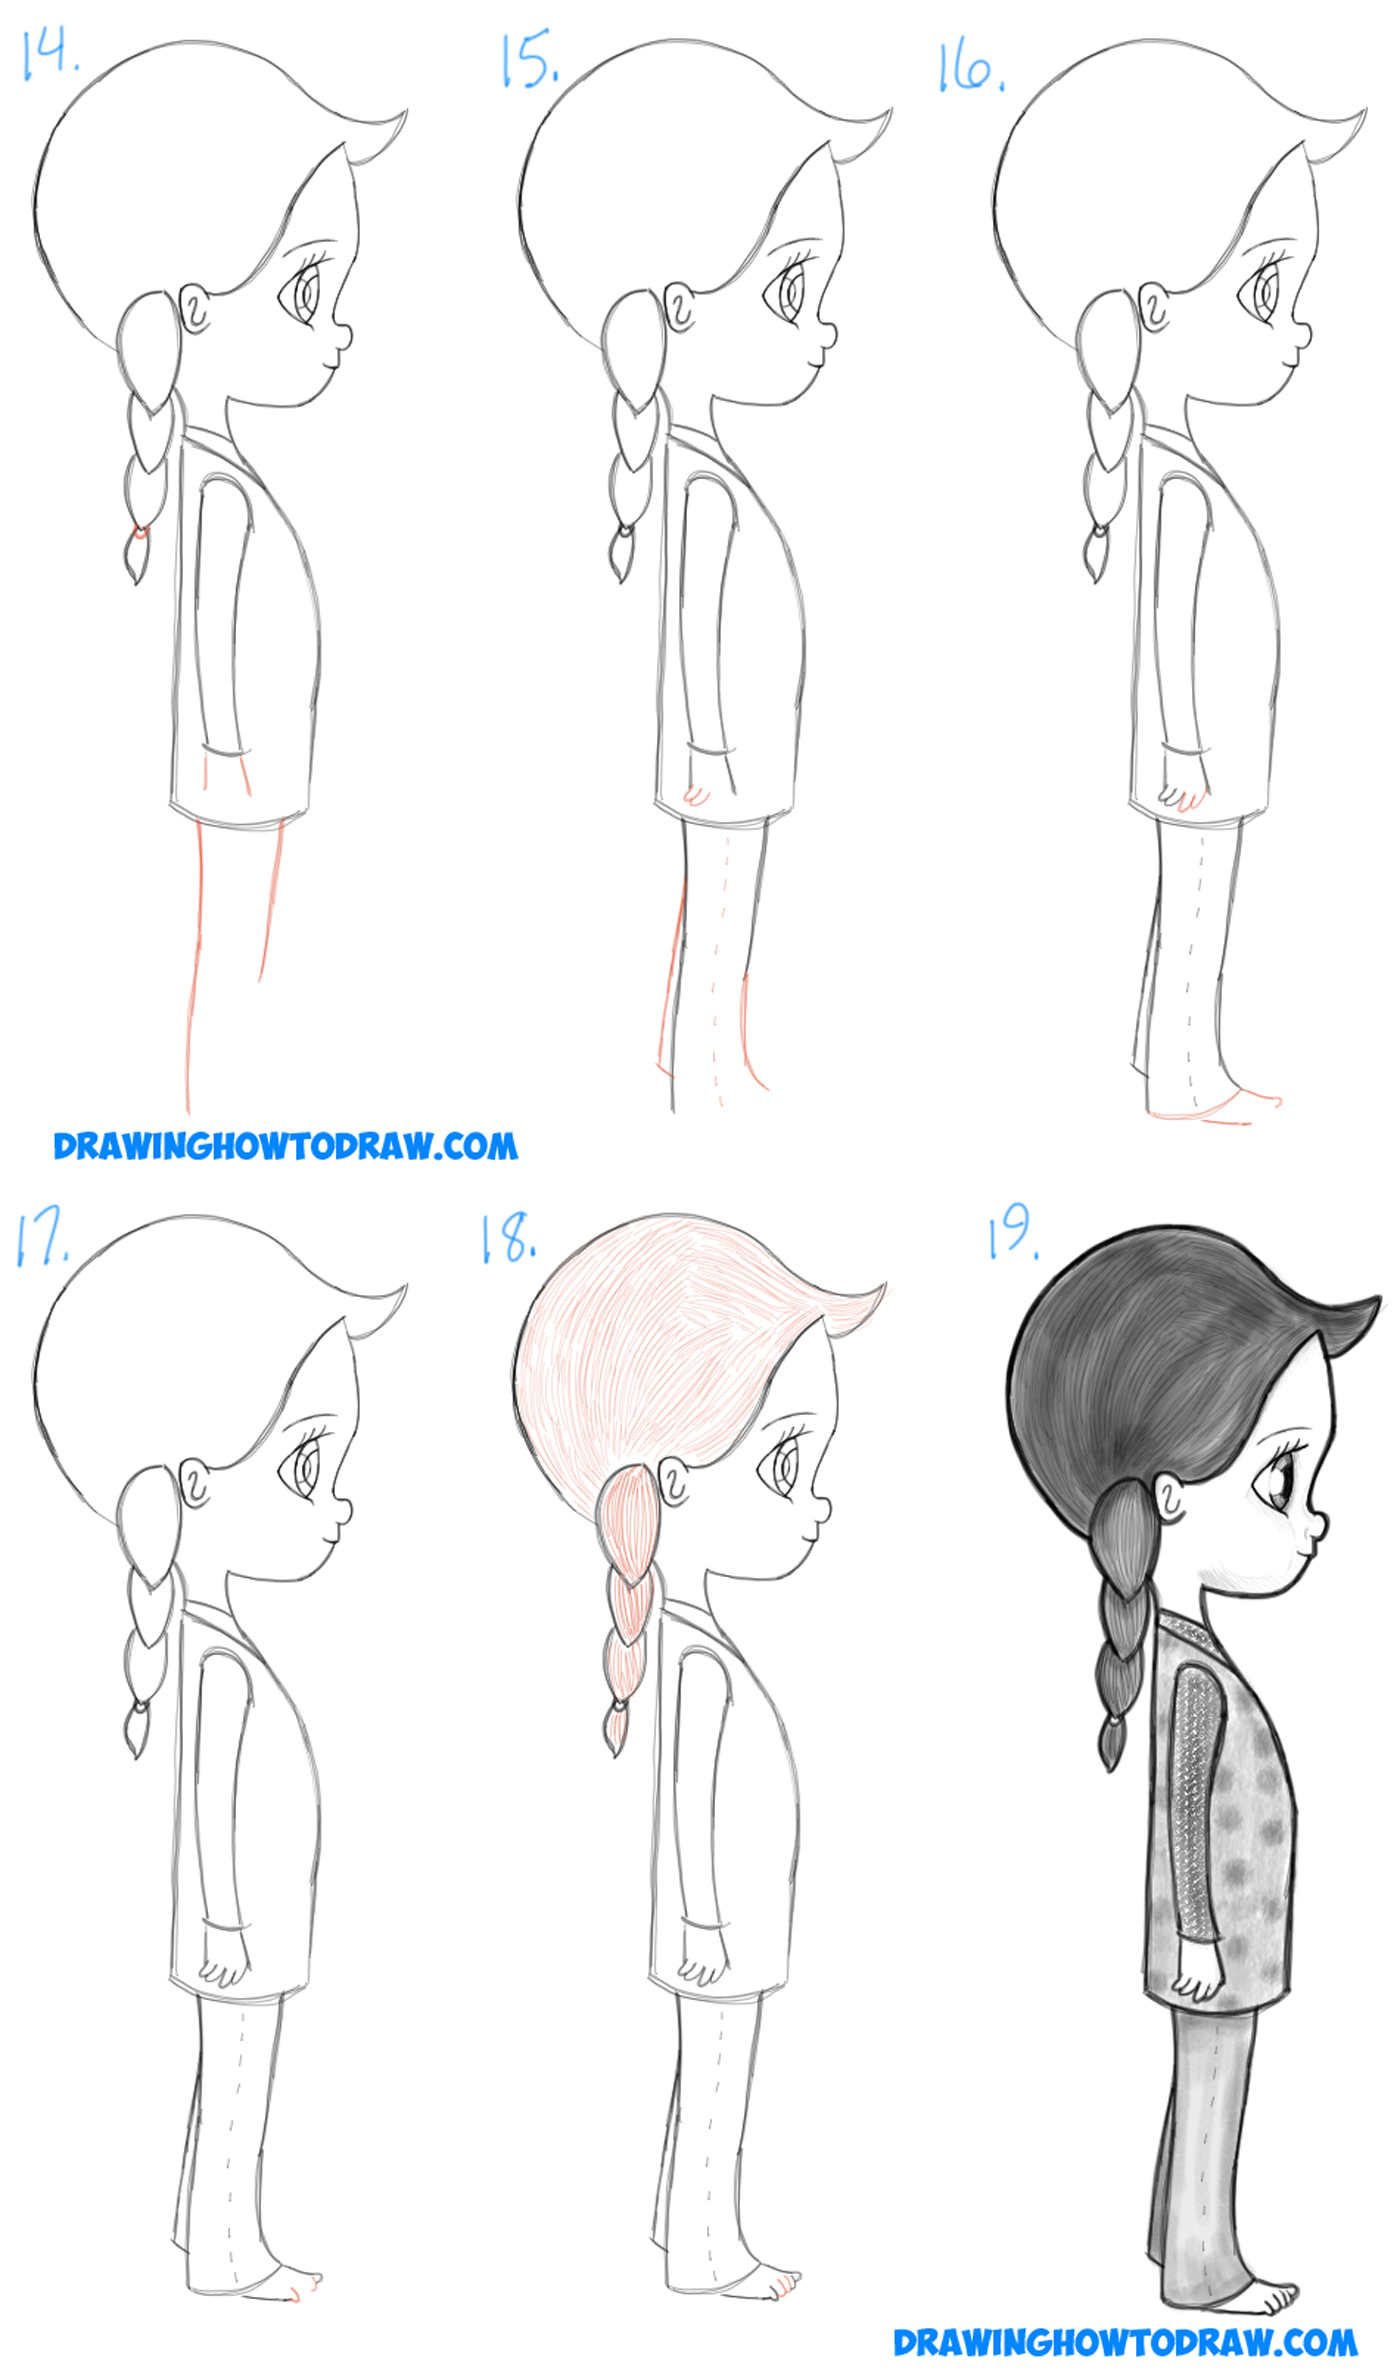 How to Draw a Cute Chibi / Manga / Anime Girl from the ...